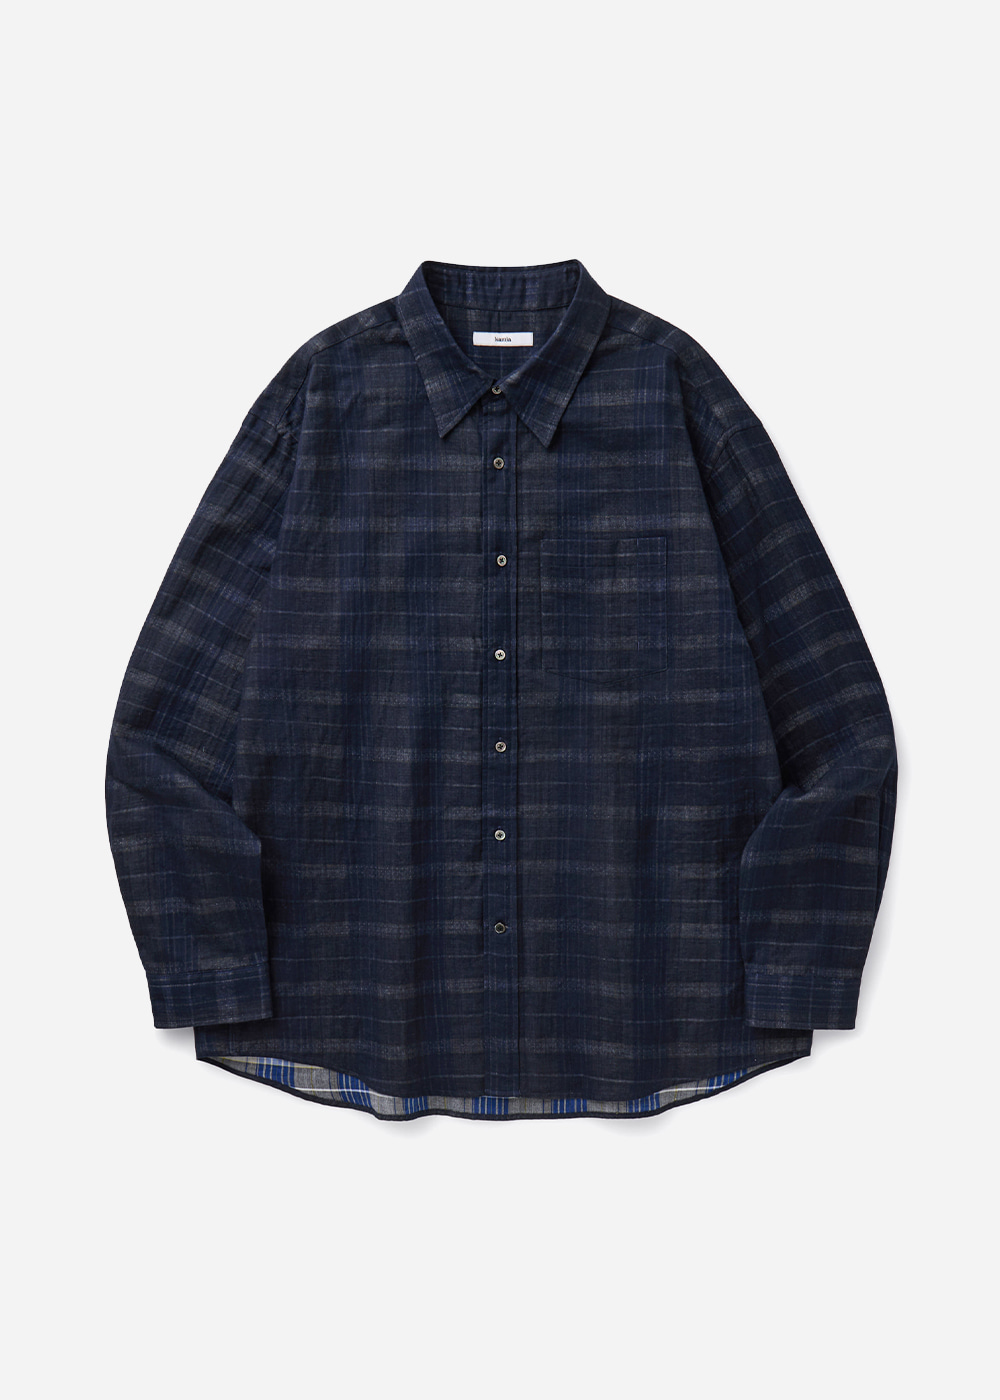 DOUBLE FACE CHECK SHIRTS [NAVY/BLUE]